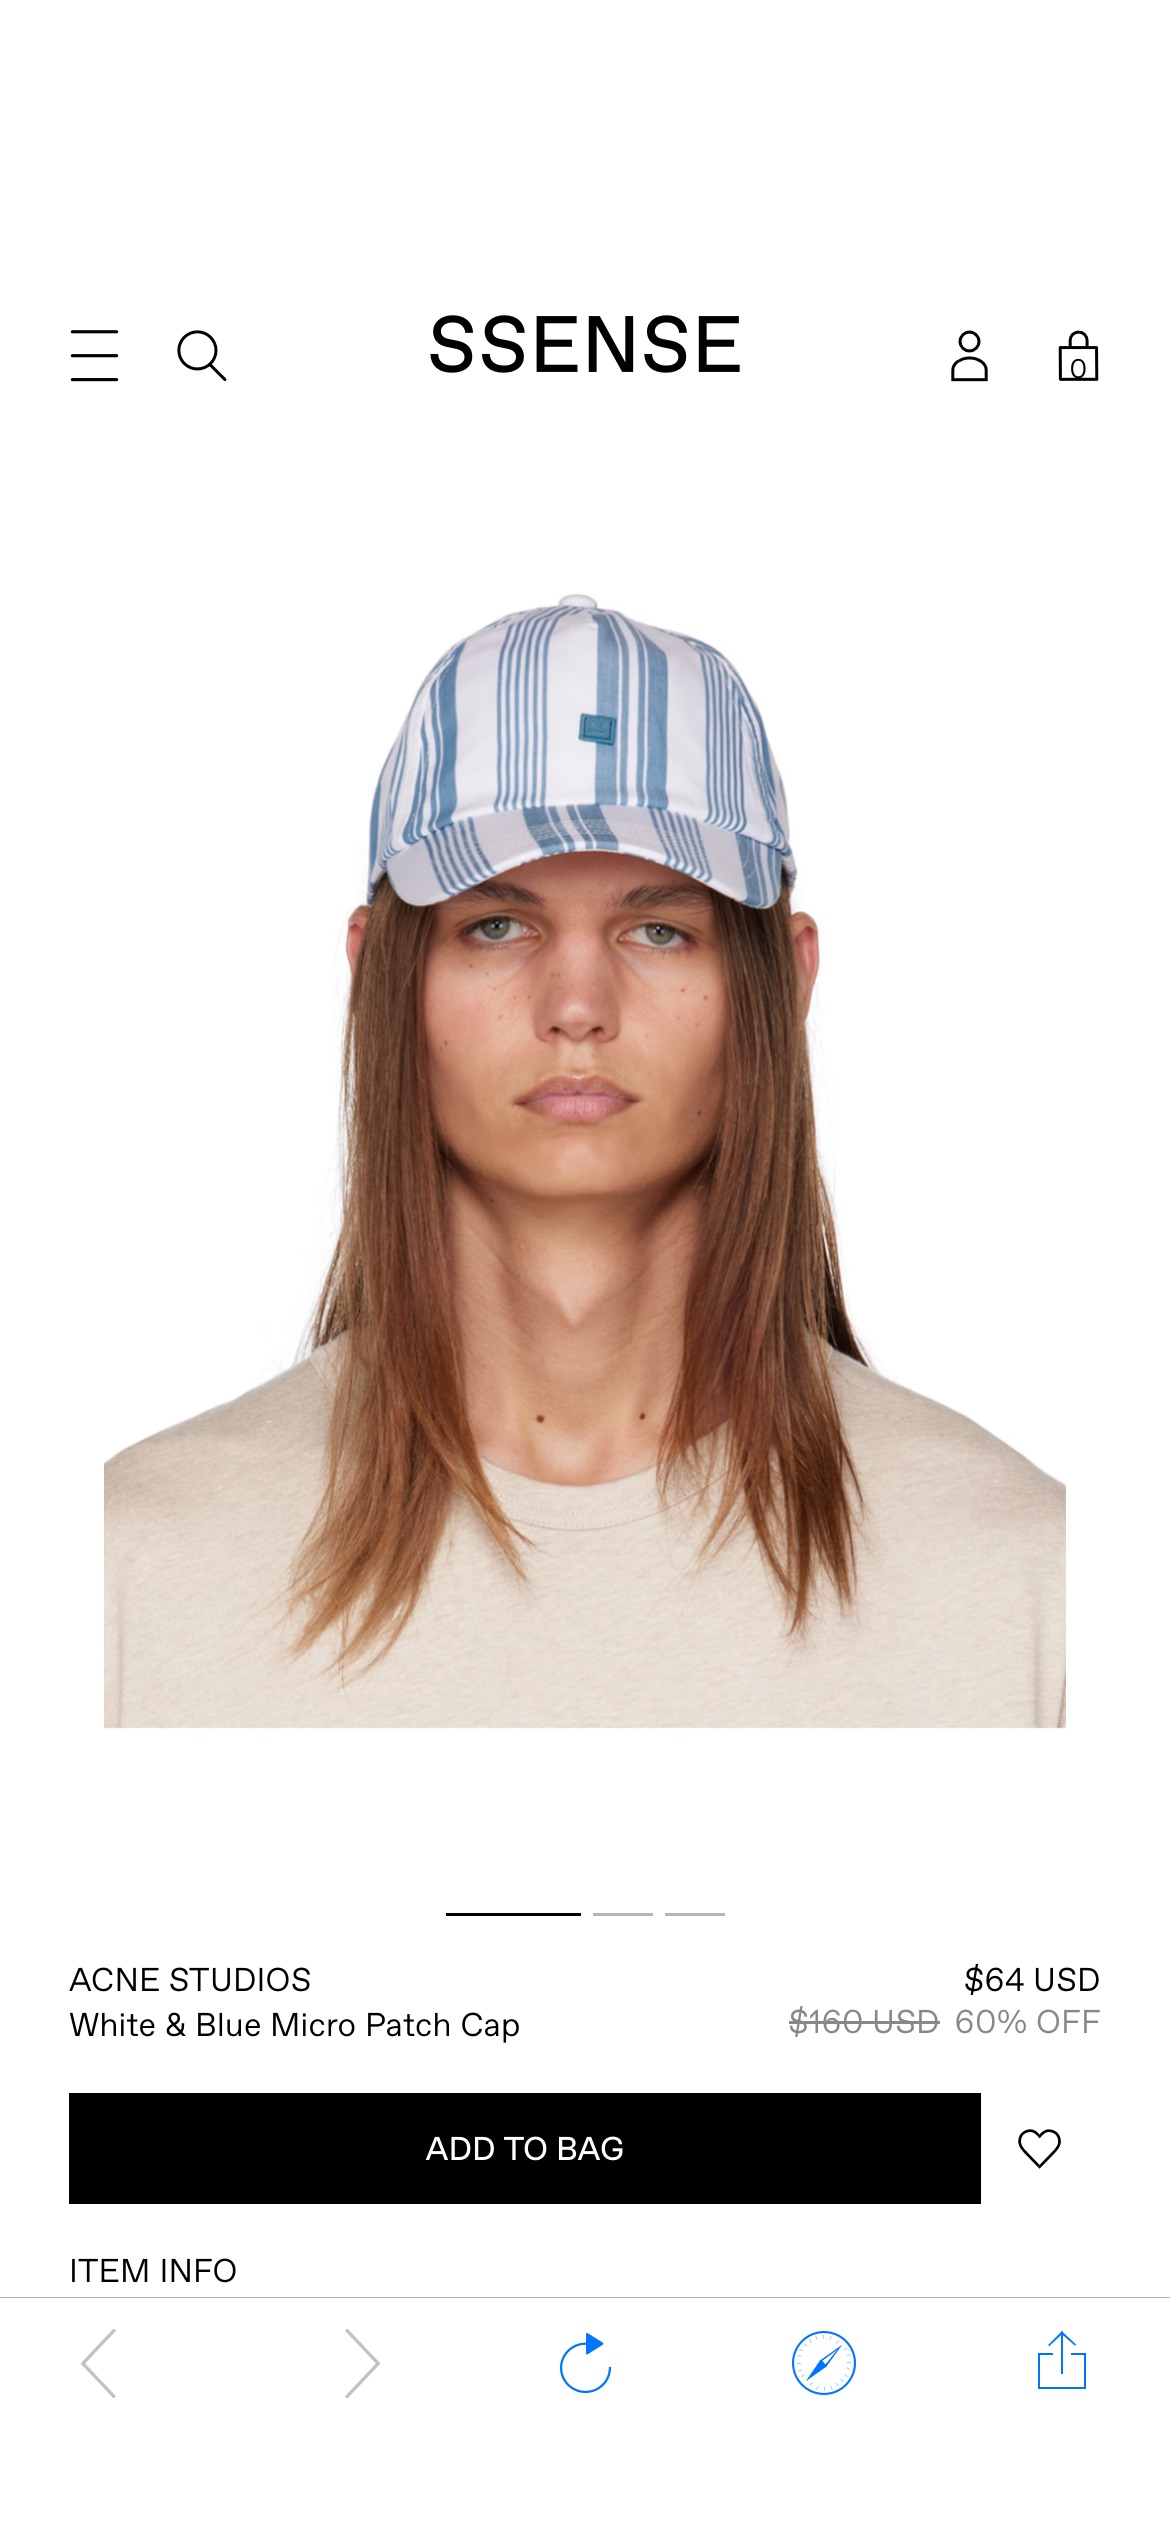 White & Blue Micro Patch Cap by Acne Studios on Sale